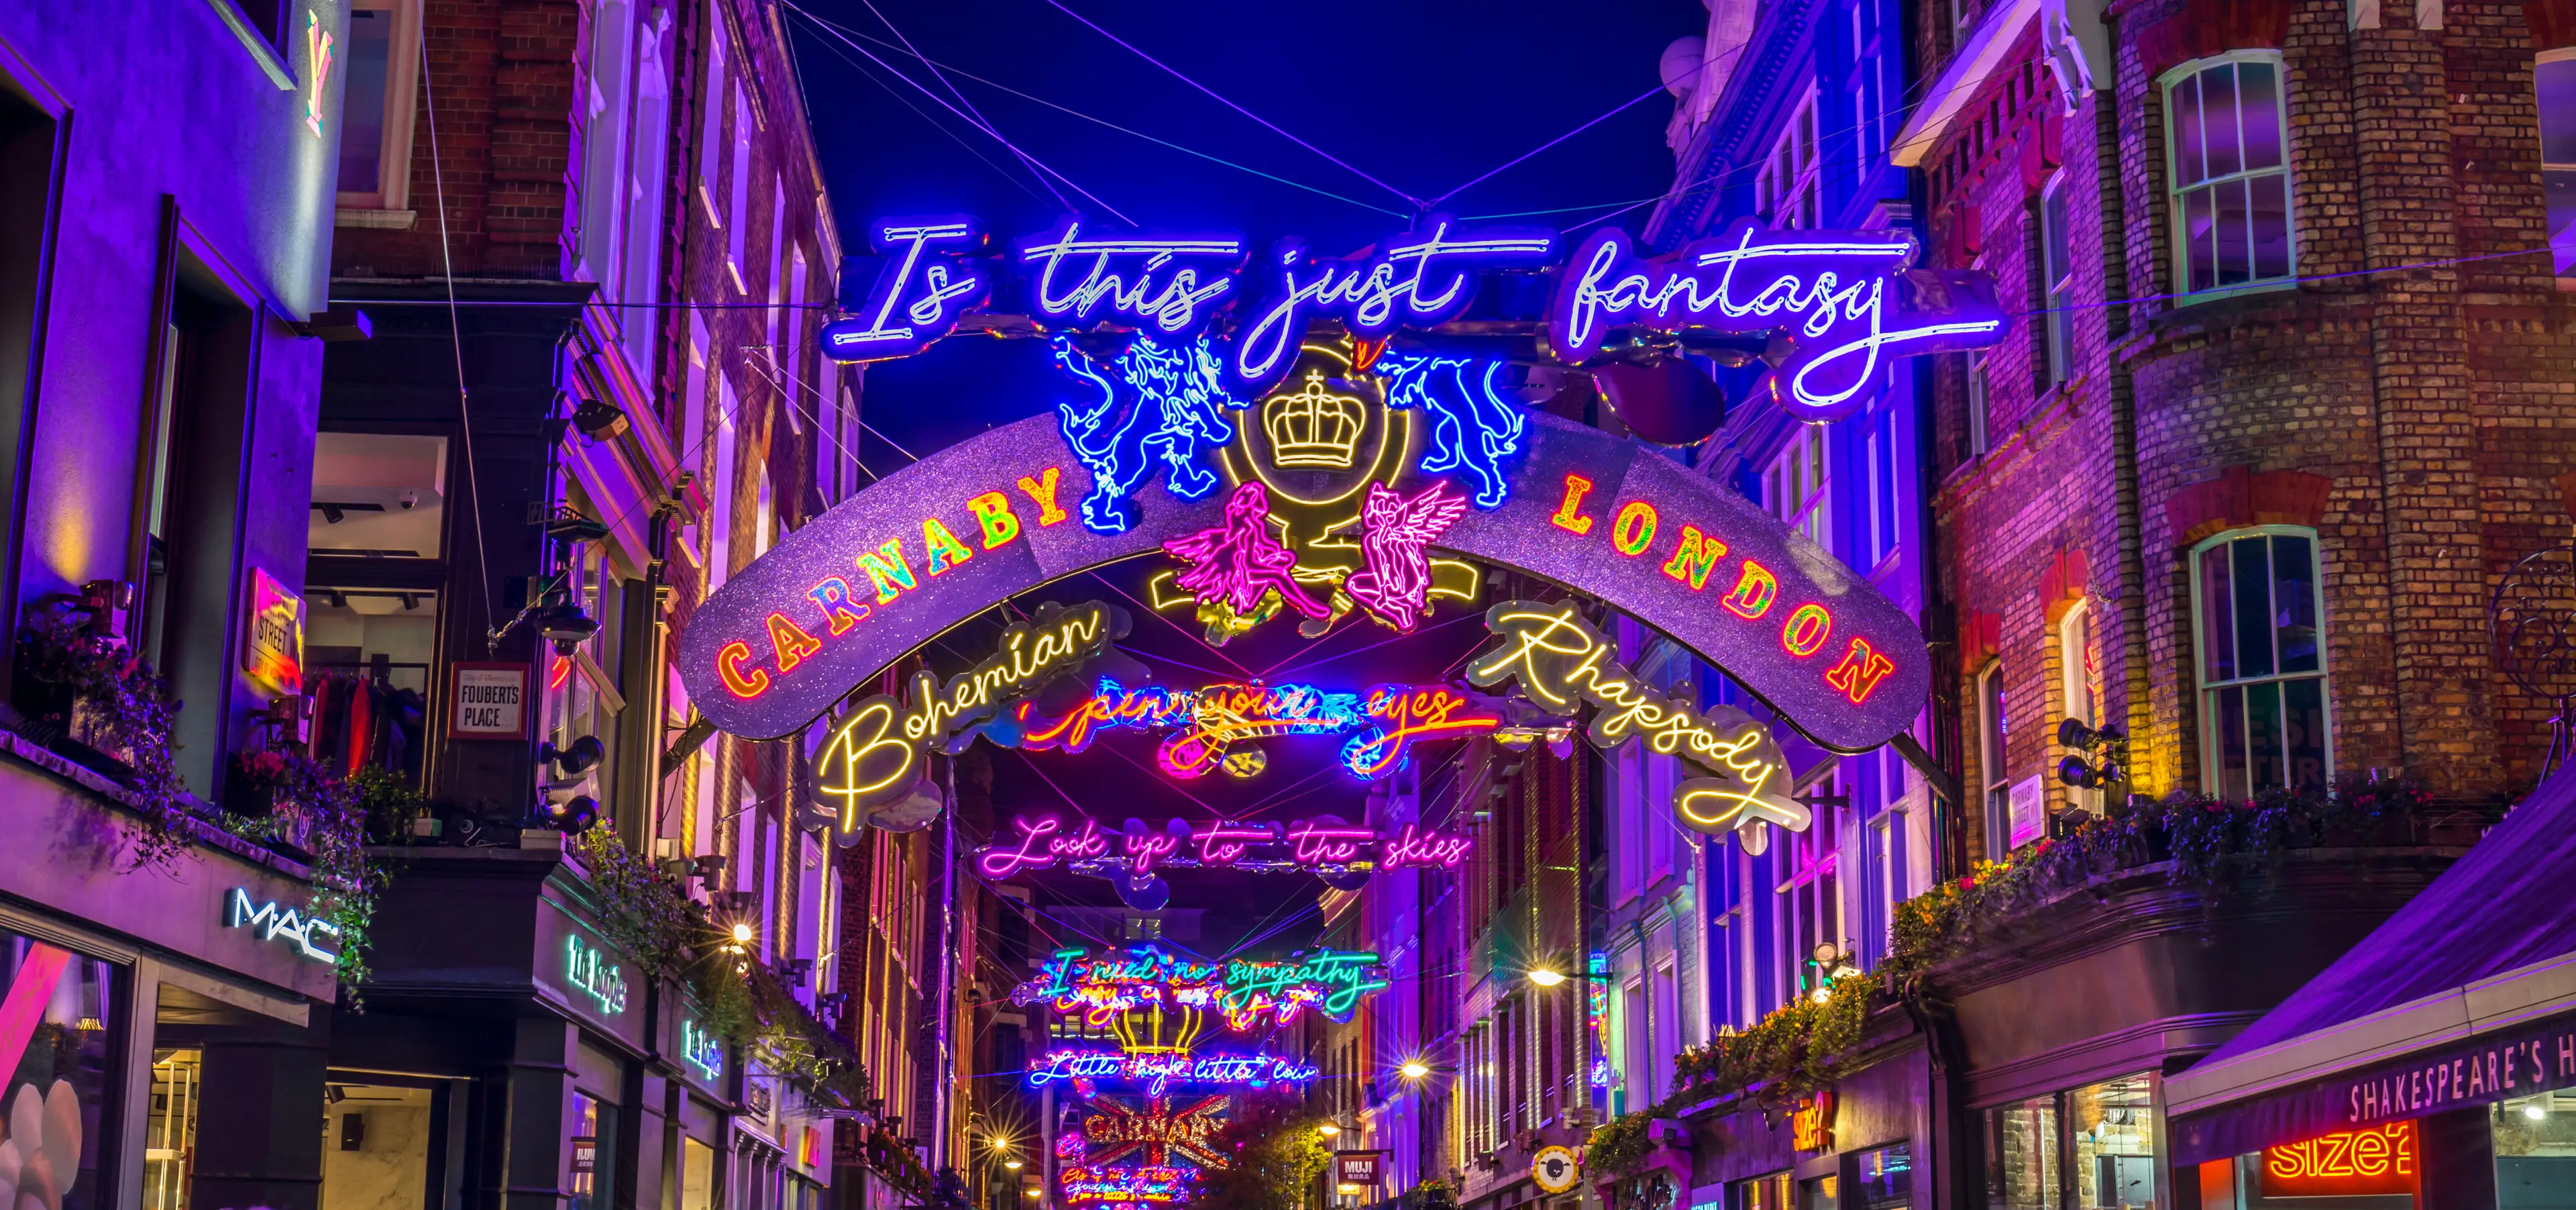 Carnaby Street during Christmas